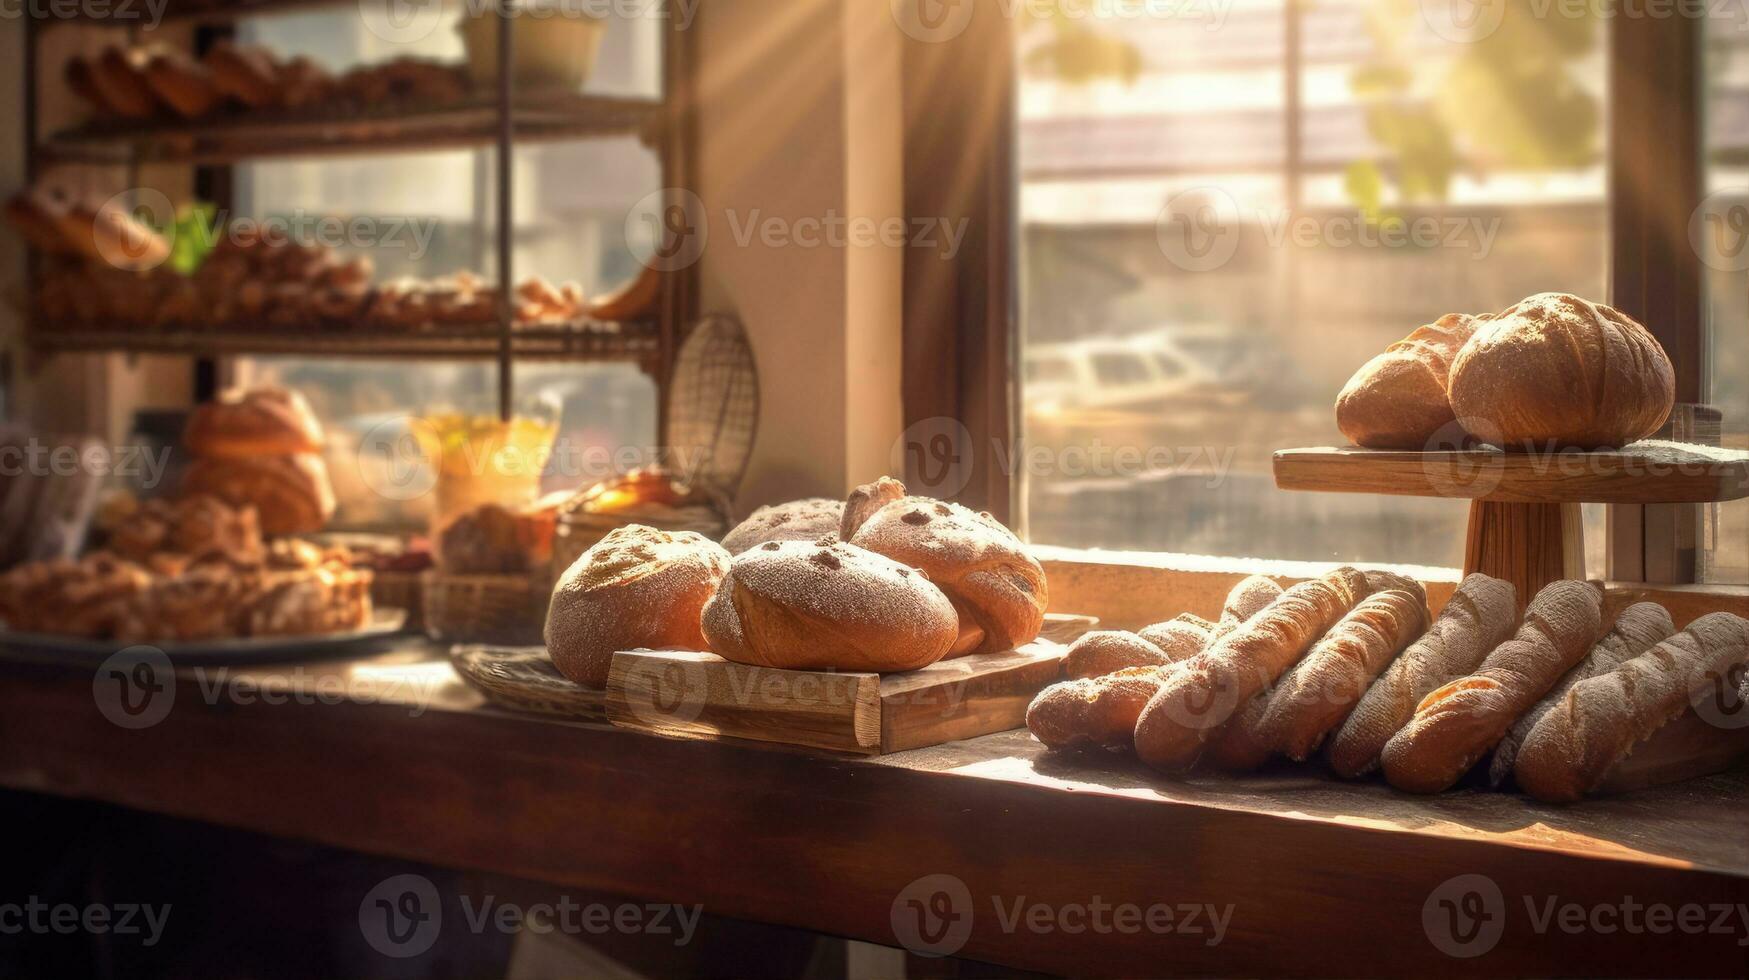 Confectionery bakery with showcases and fresh pastries in the rays of sunlight photo